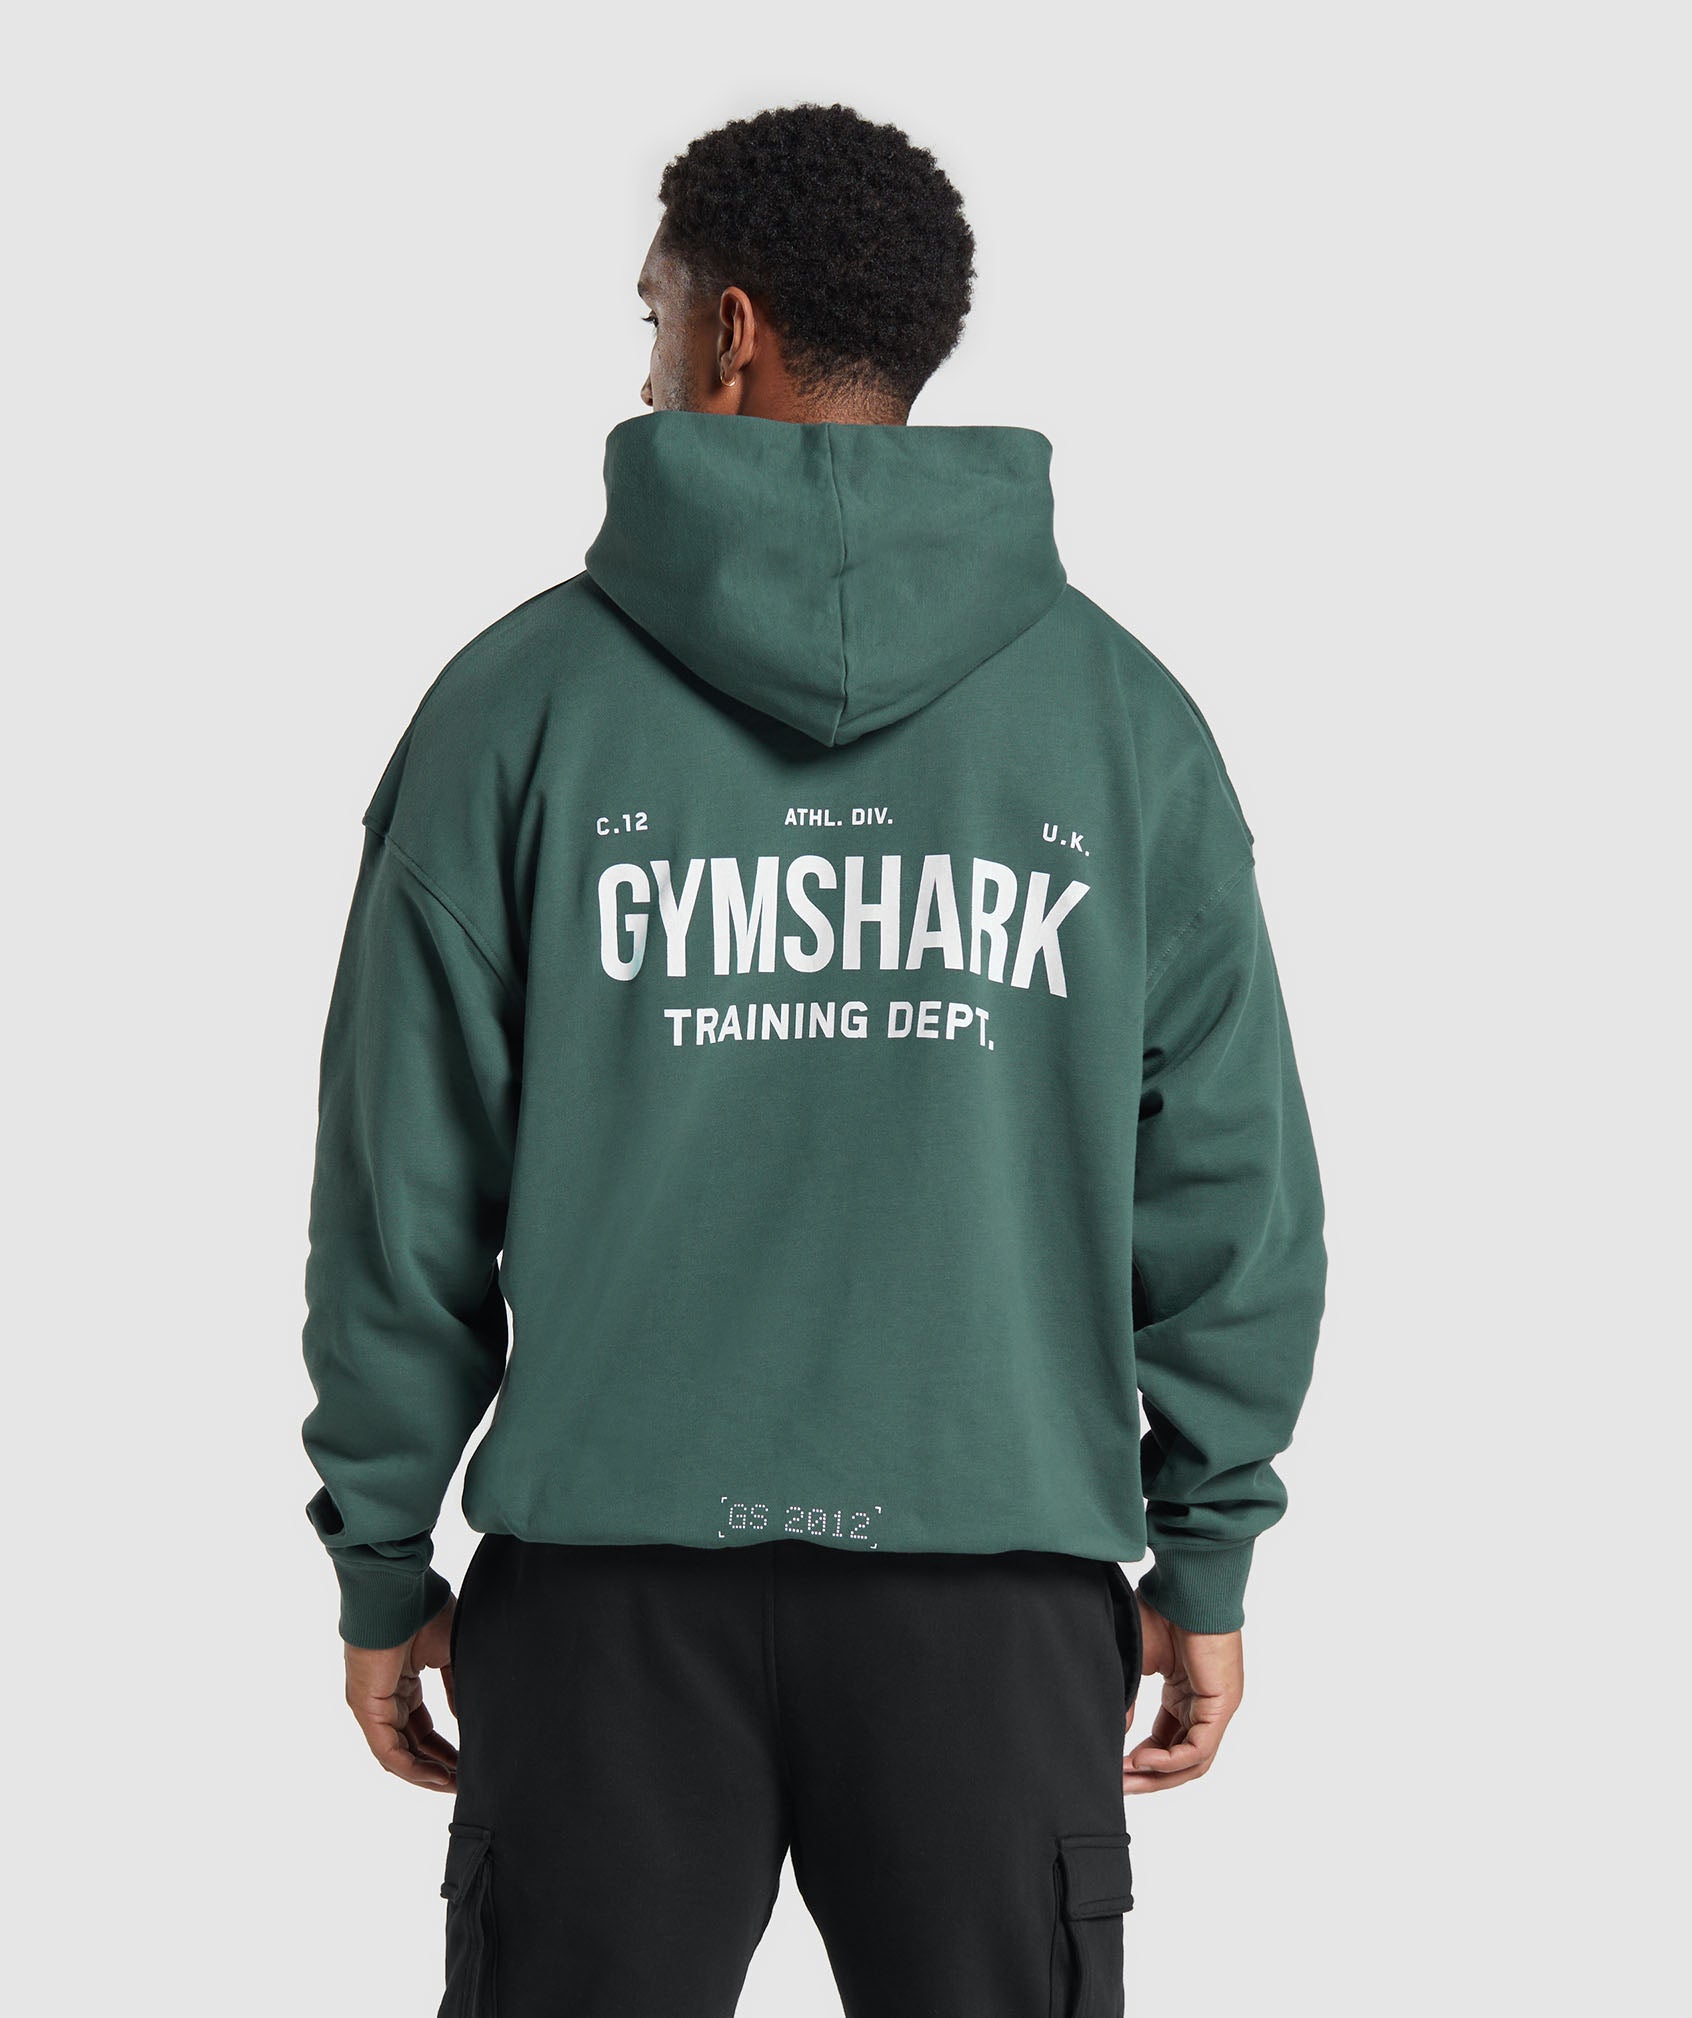 Training Dept. Hoodie in {{variantColor} is out of stock